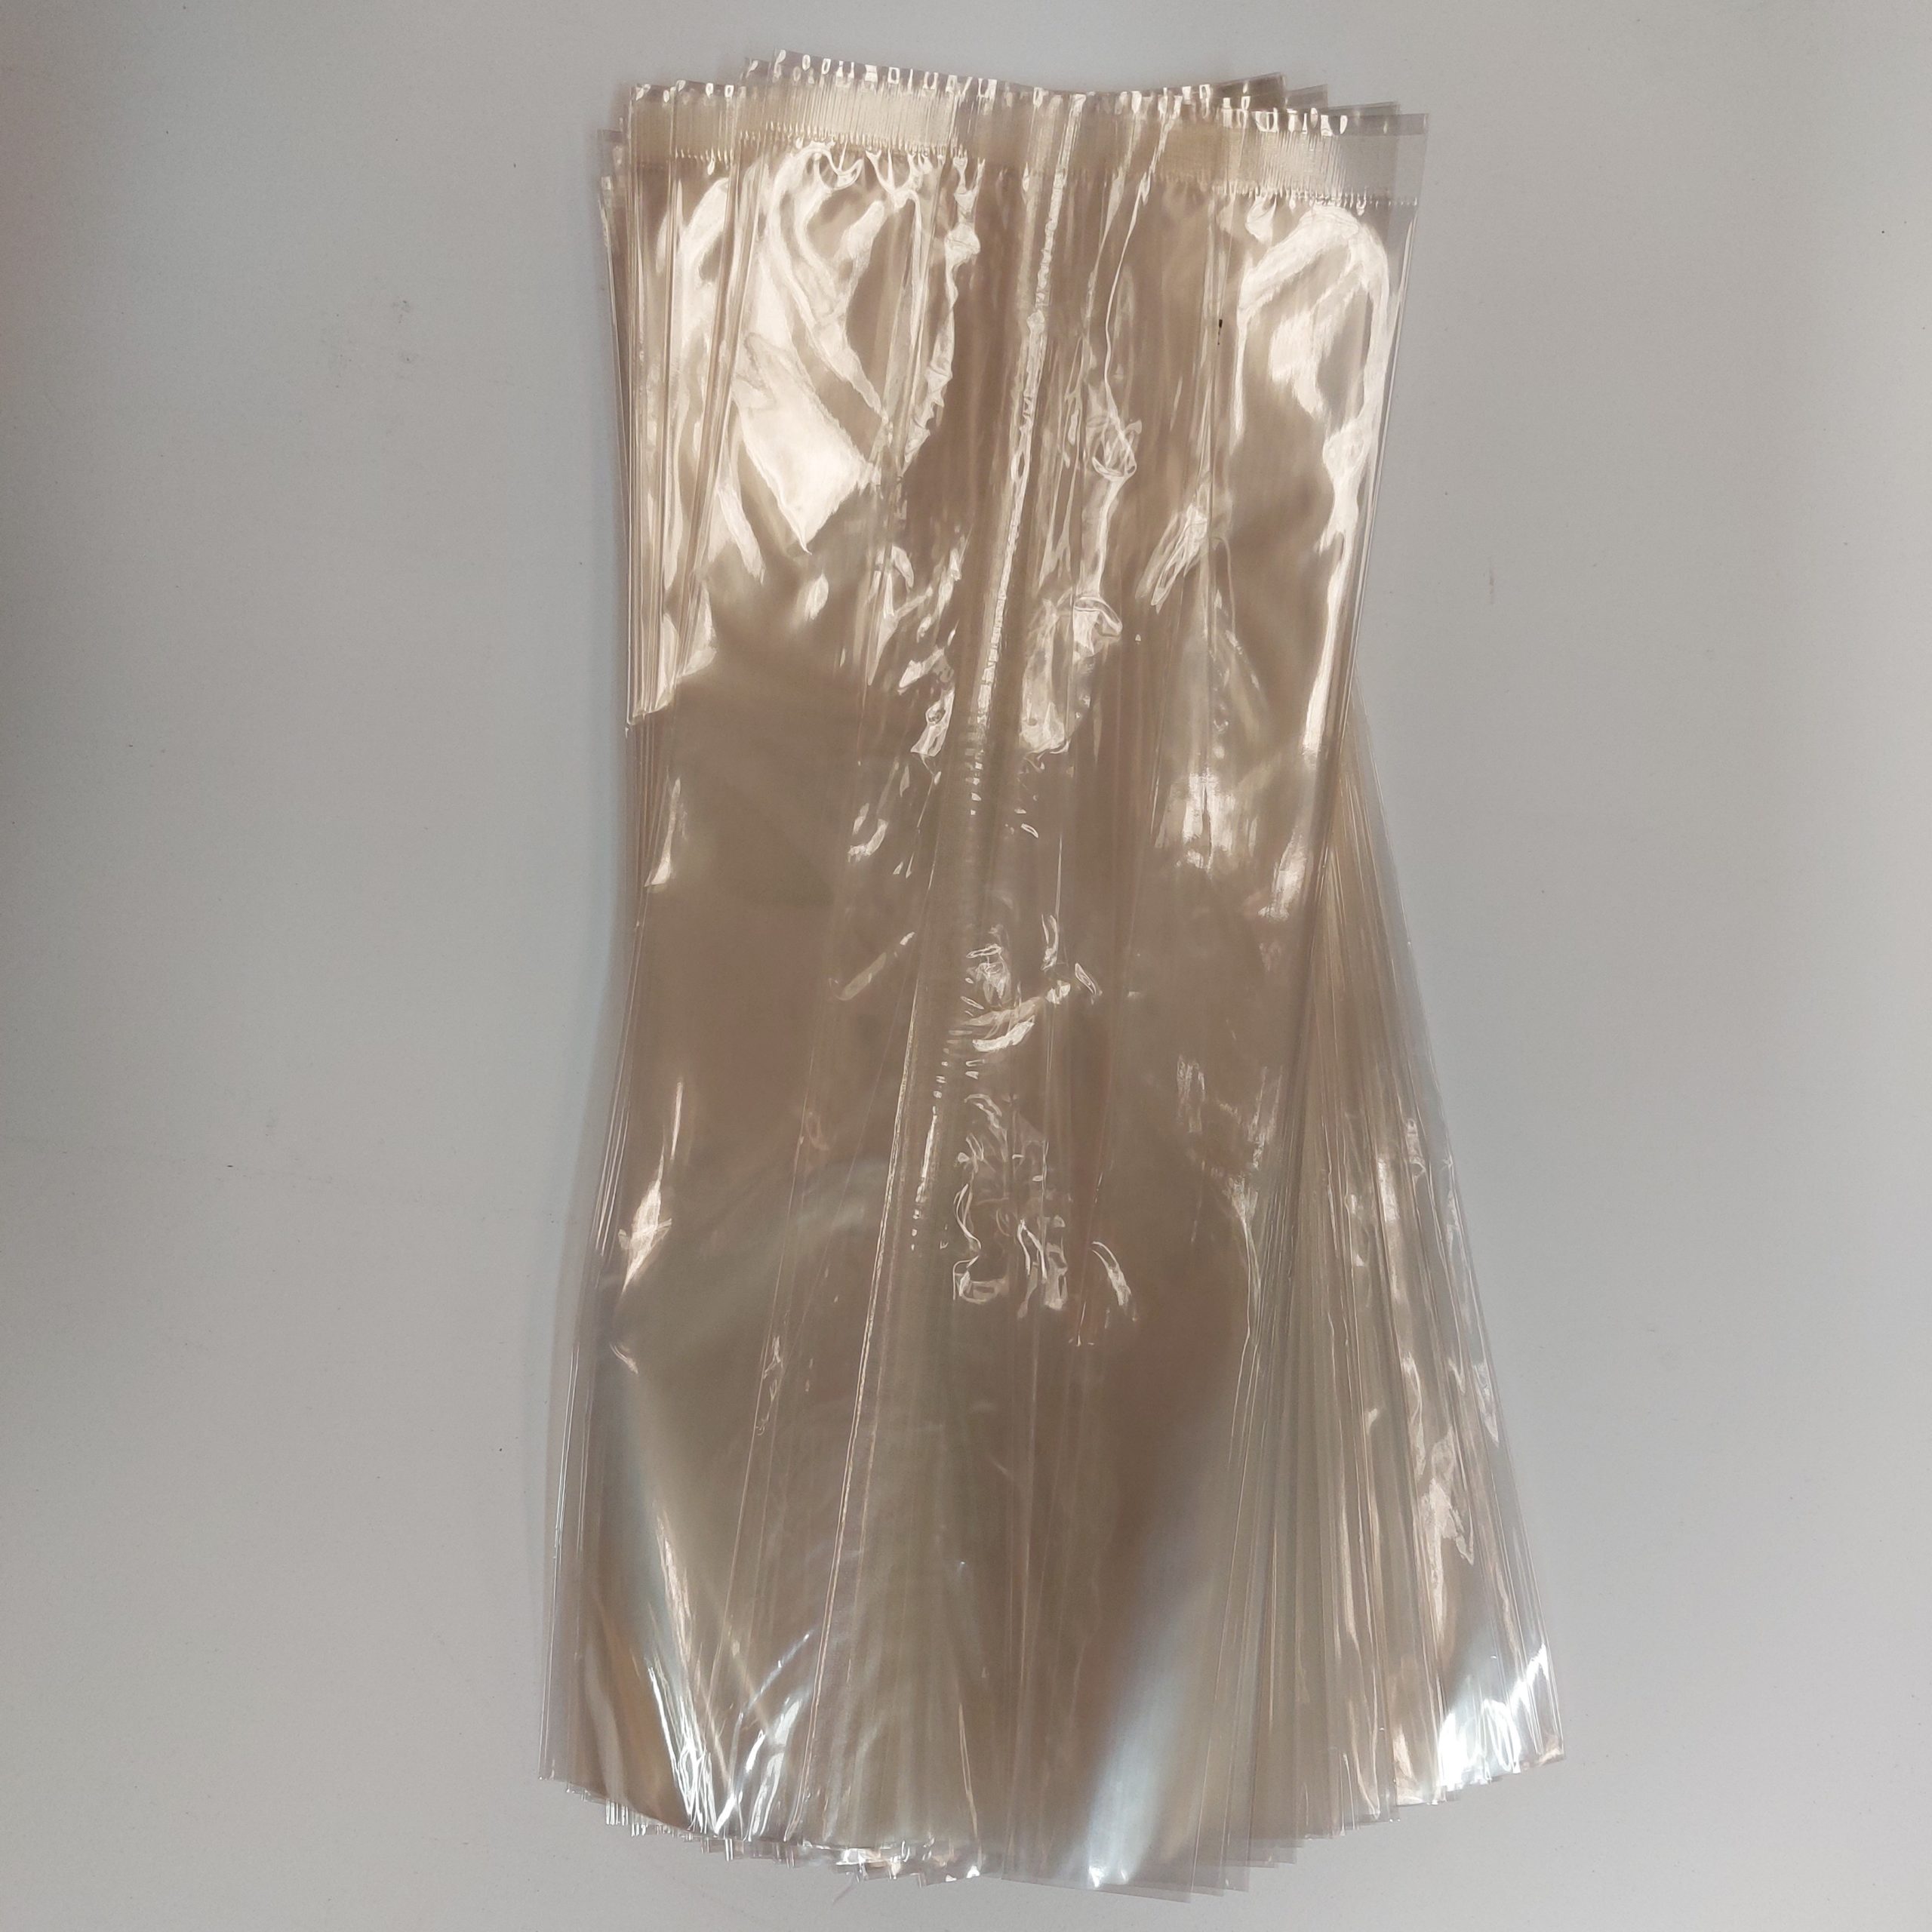 300 Cellophane Bags 115 x 190 mm, Set of 300 Polypropylene Cellophane Bags  PP Film : Amazon.co.uk: Business, Industry & Science